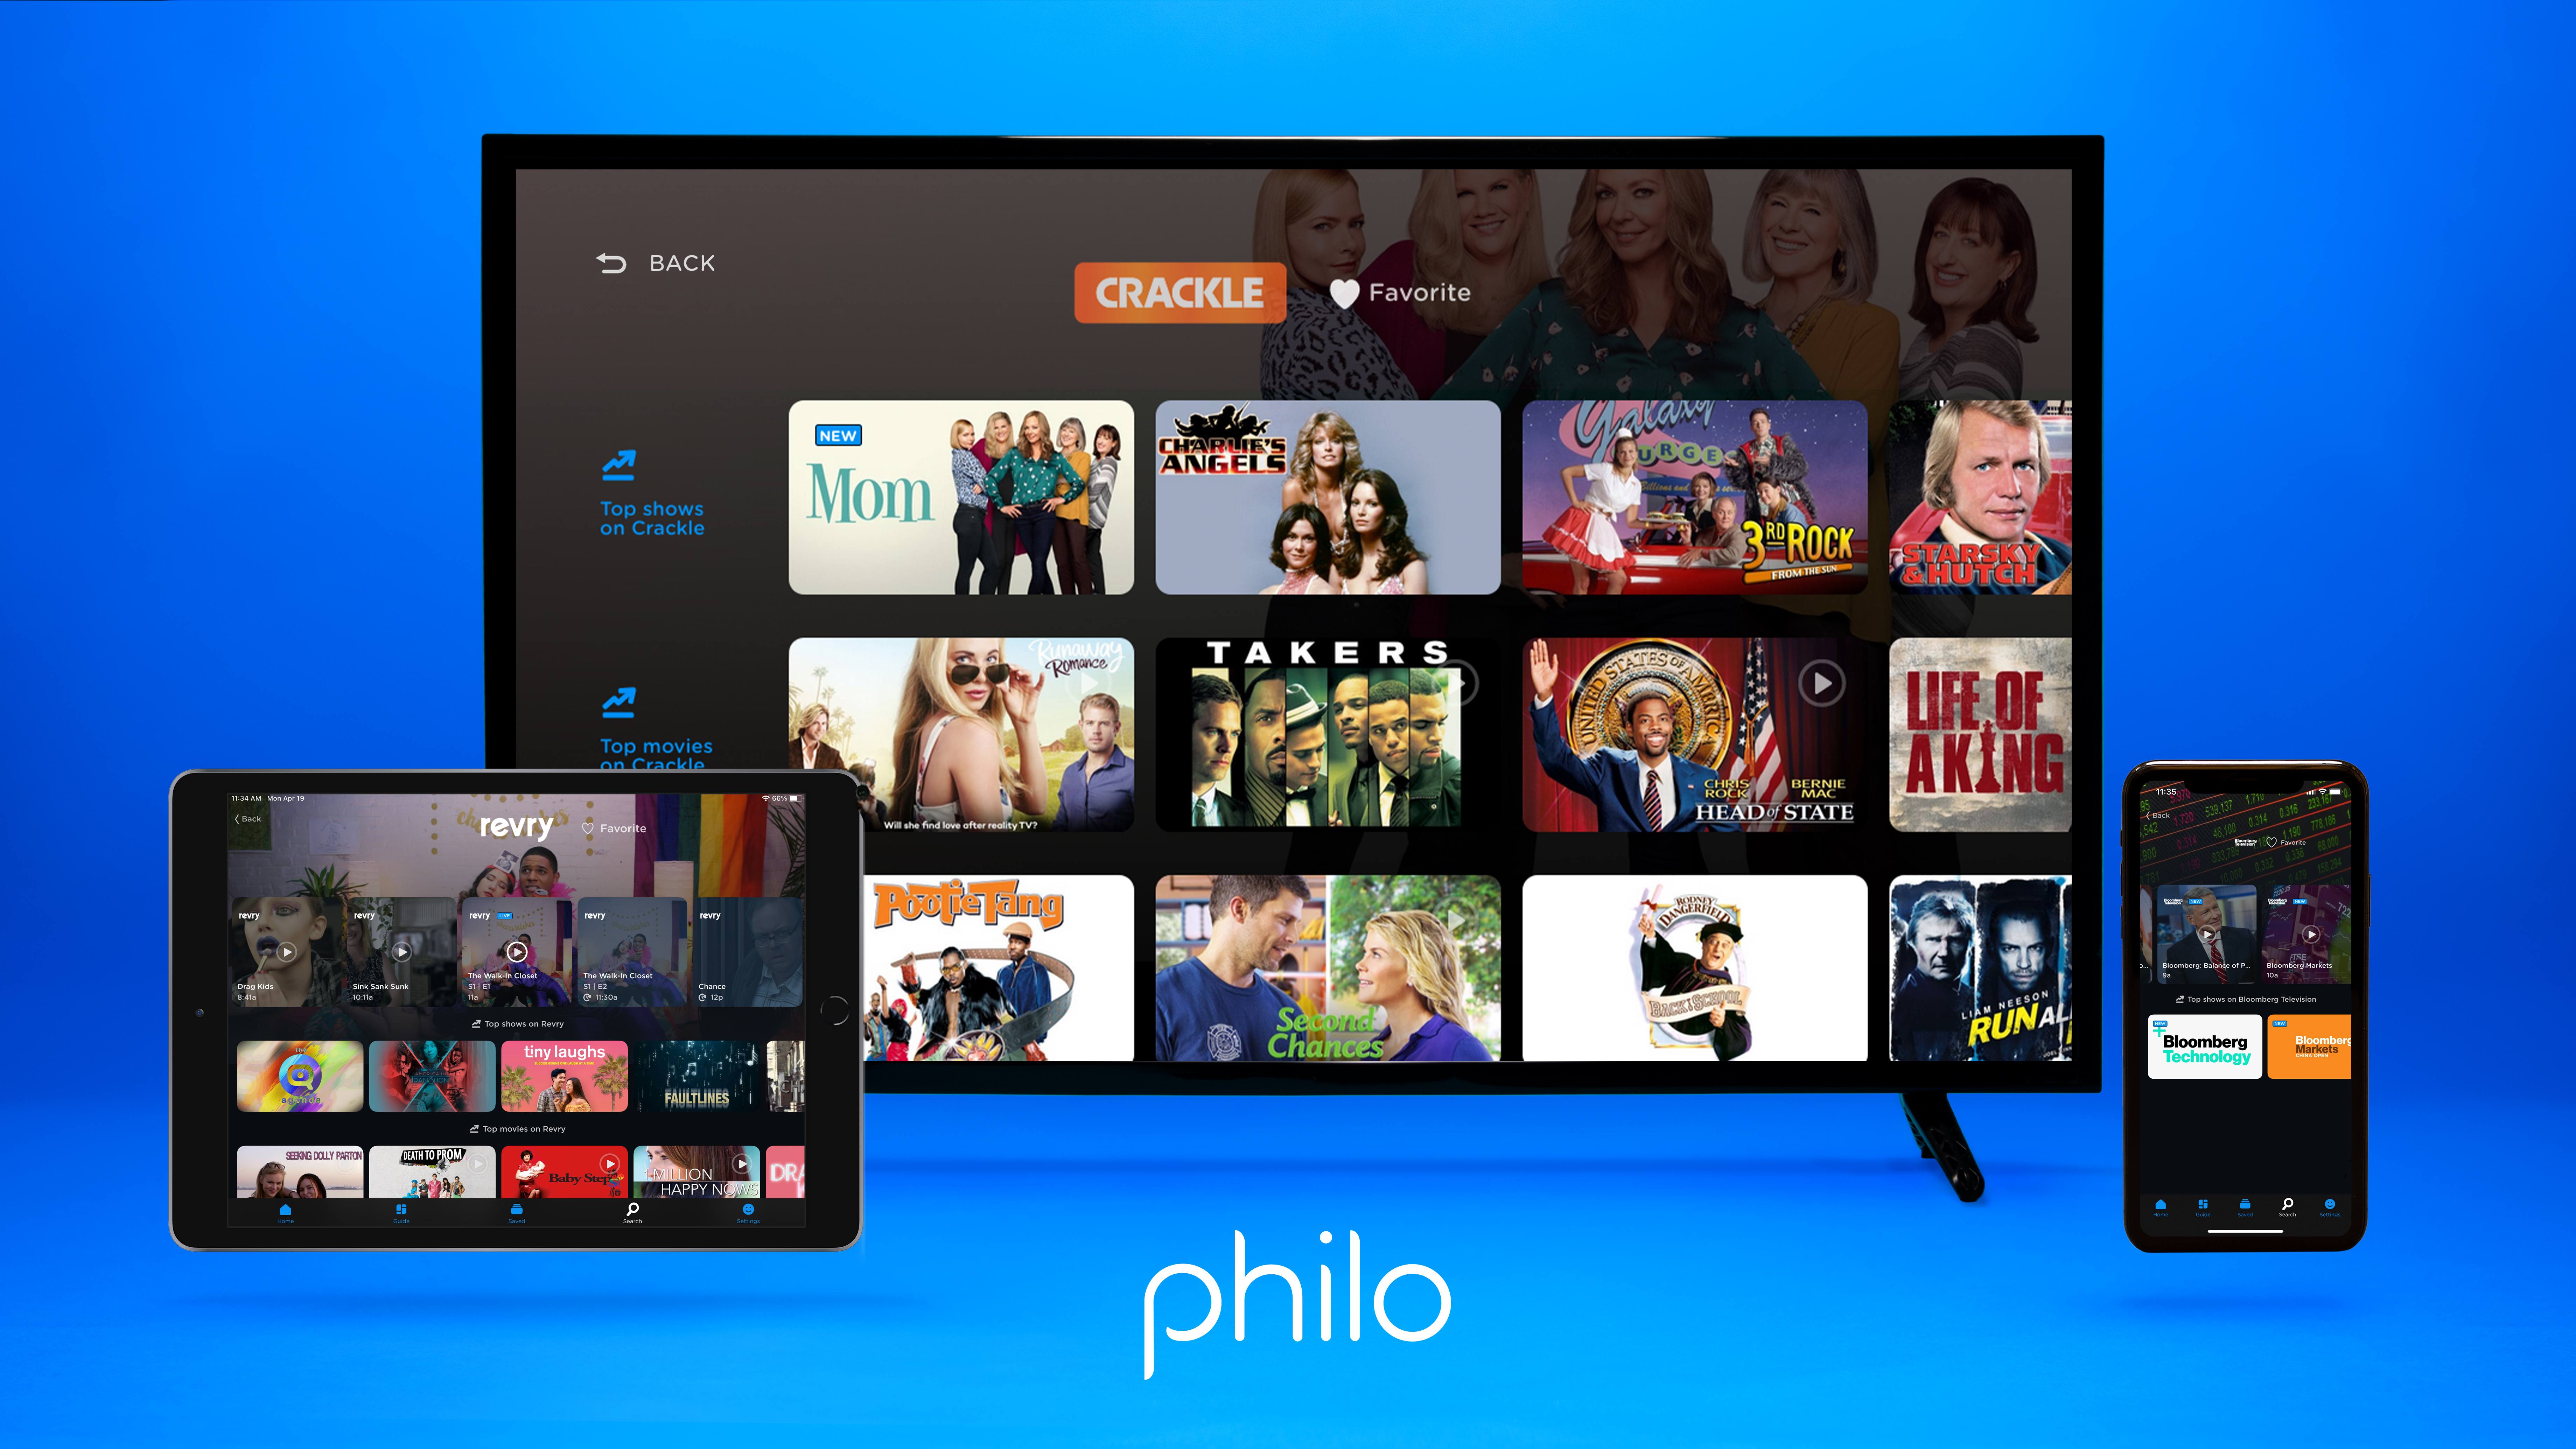 Philo Adds Crackle, Bloomberg TV, and Revry